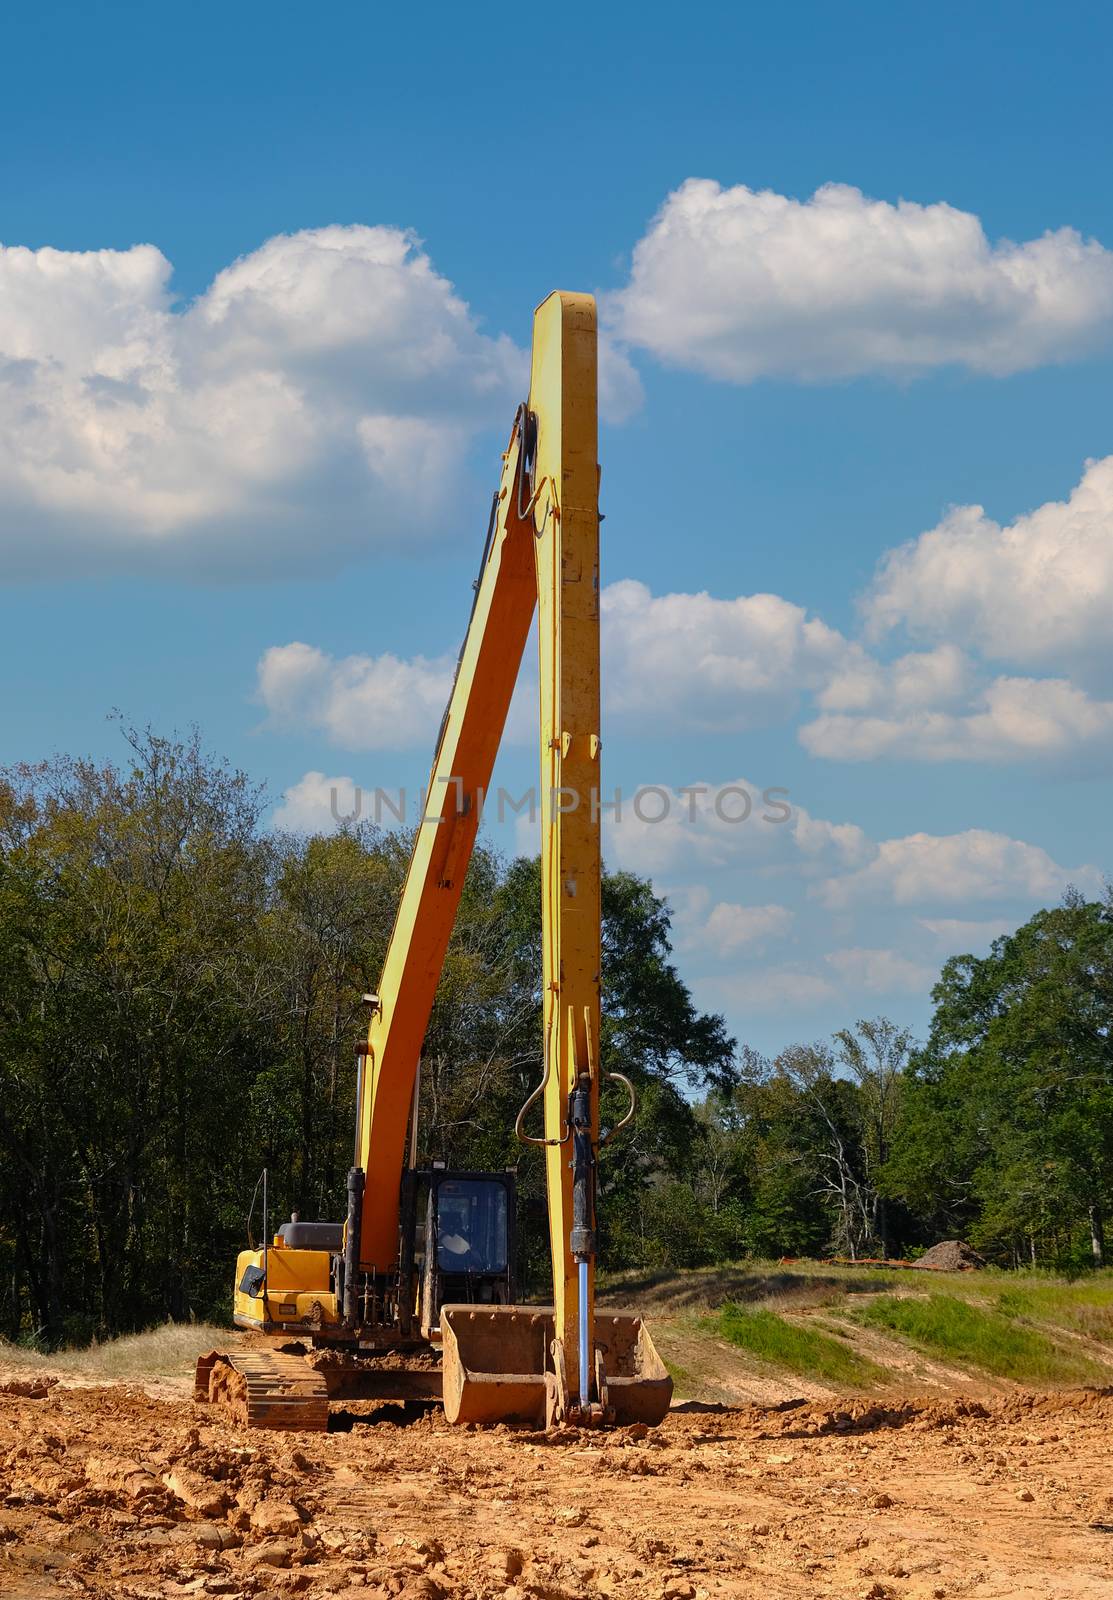 Tall Loader on Graded Construction Site by dbvirago